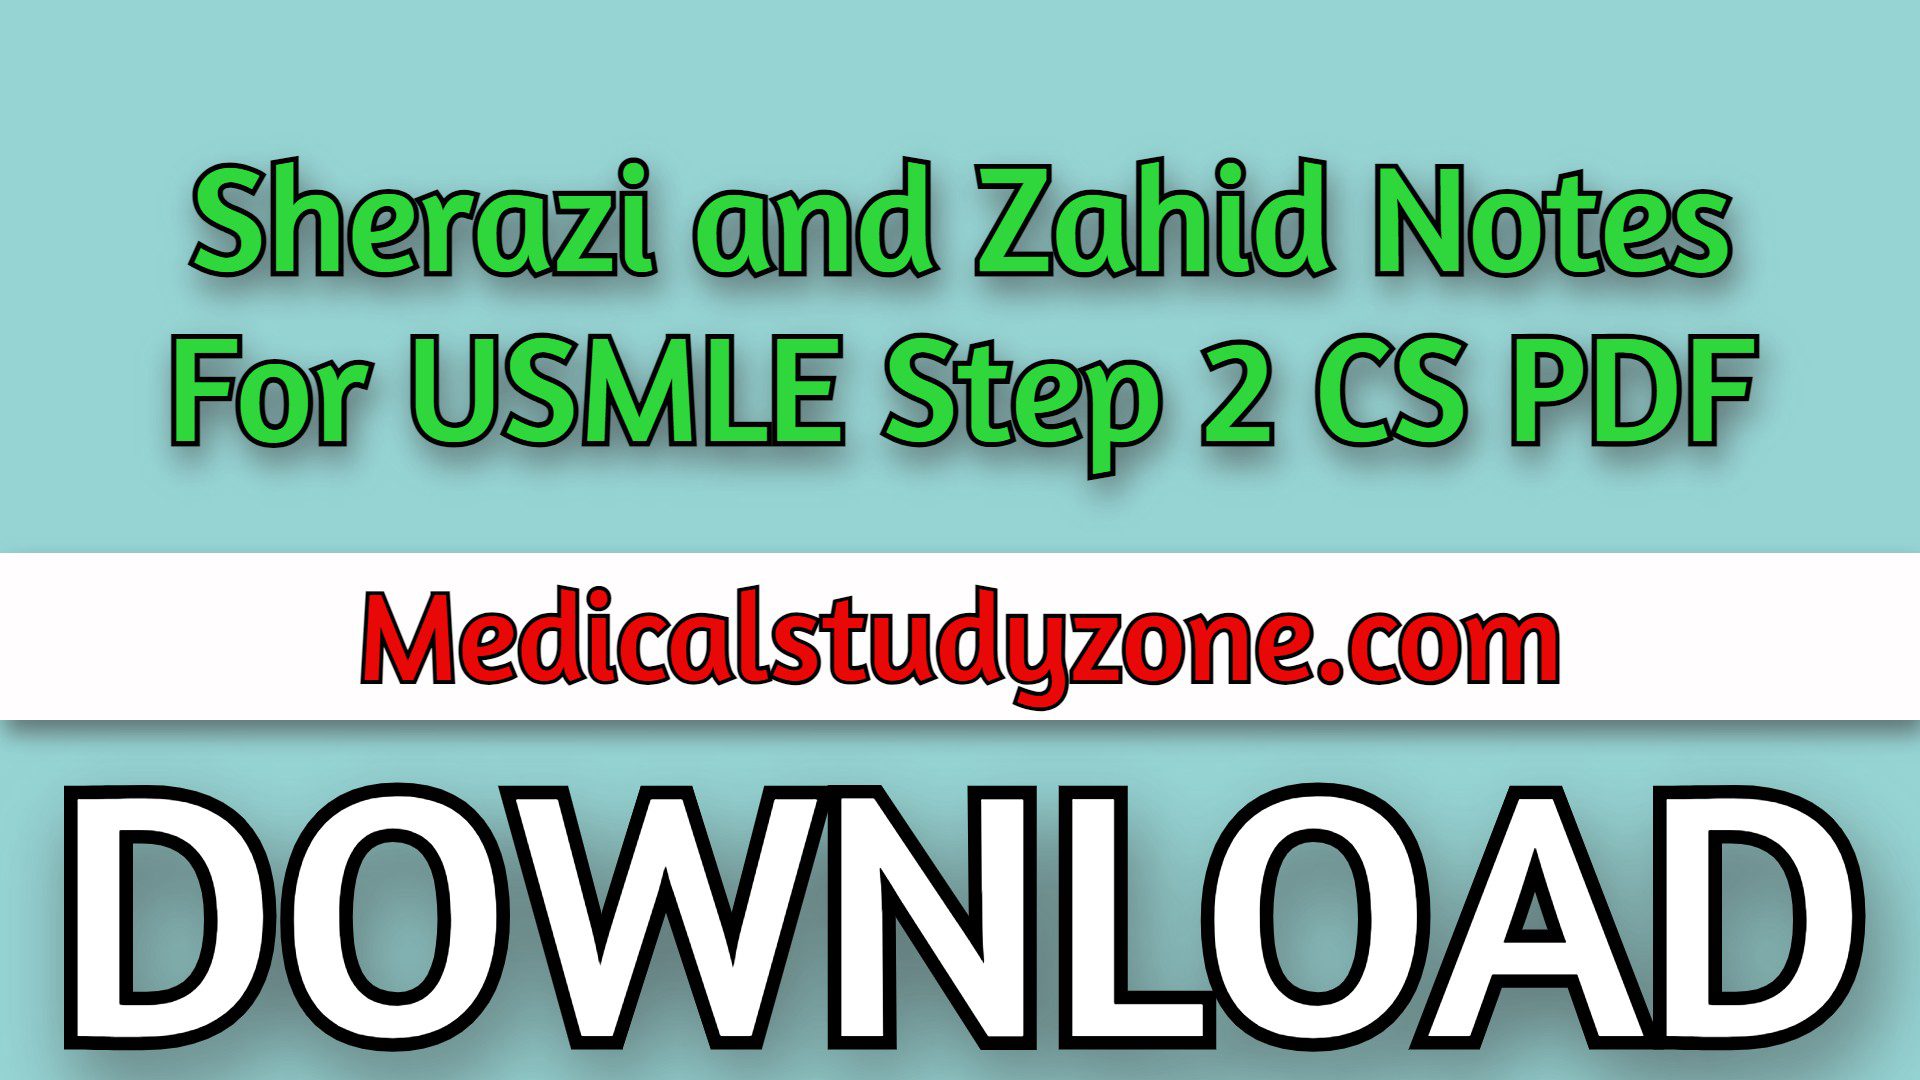 Sherazi and Zahid Notes For USMLE Step 2 CS PDF Free Download